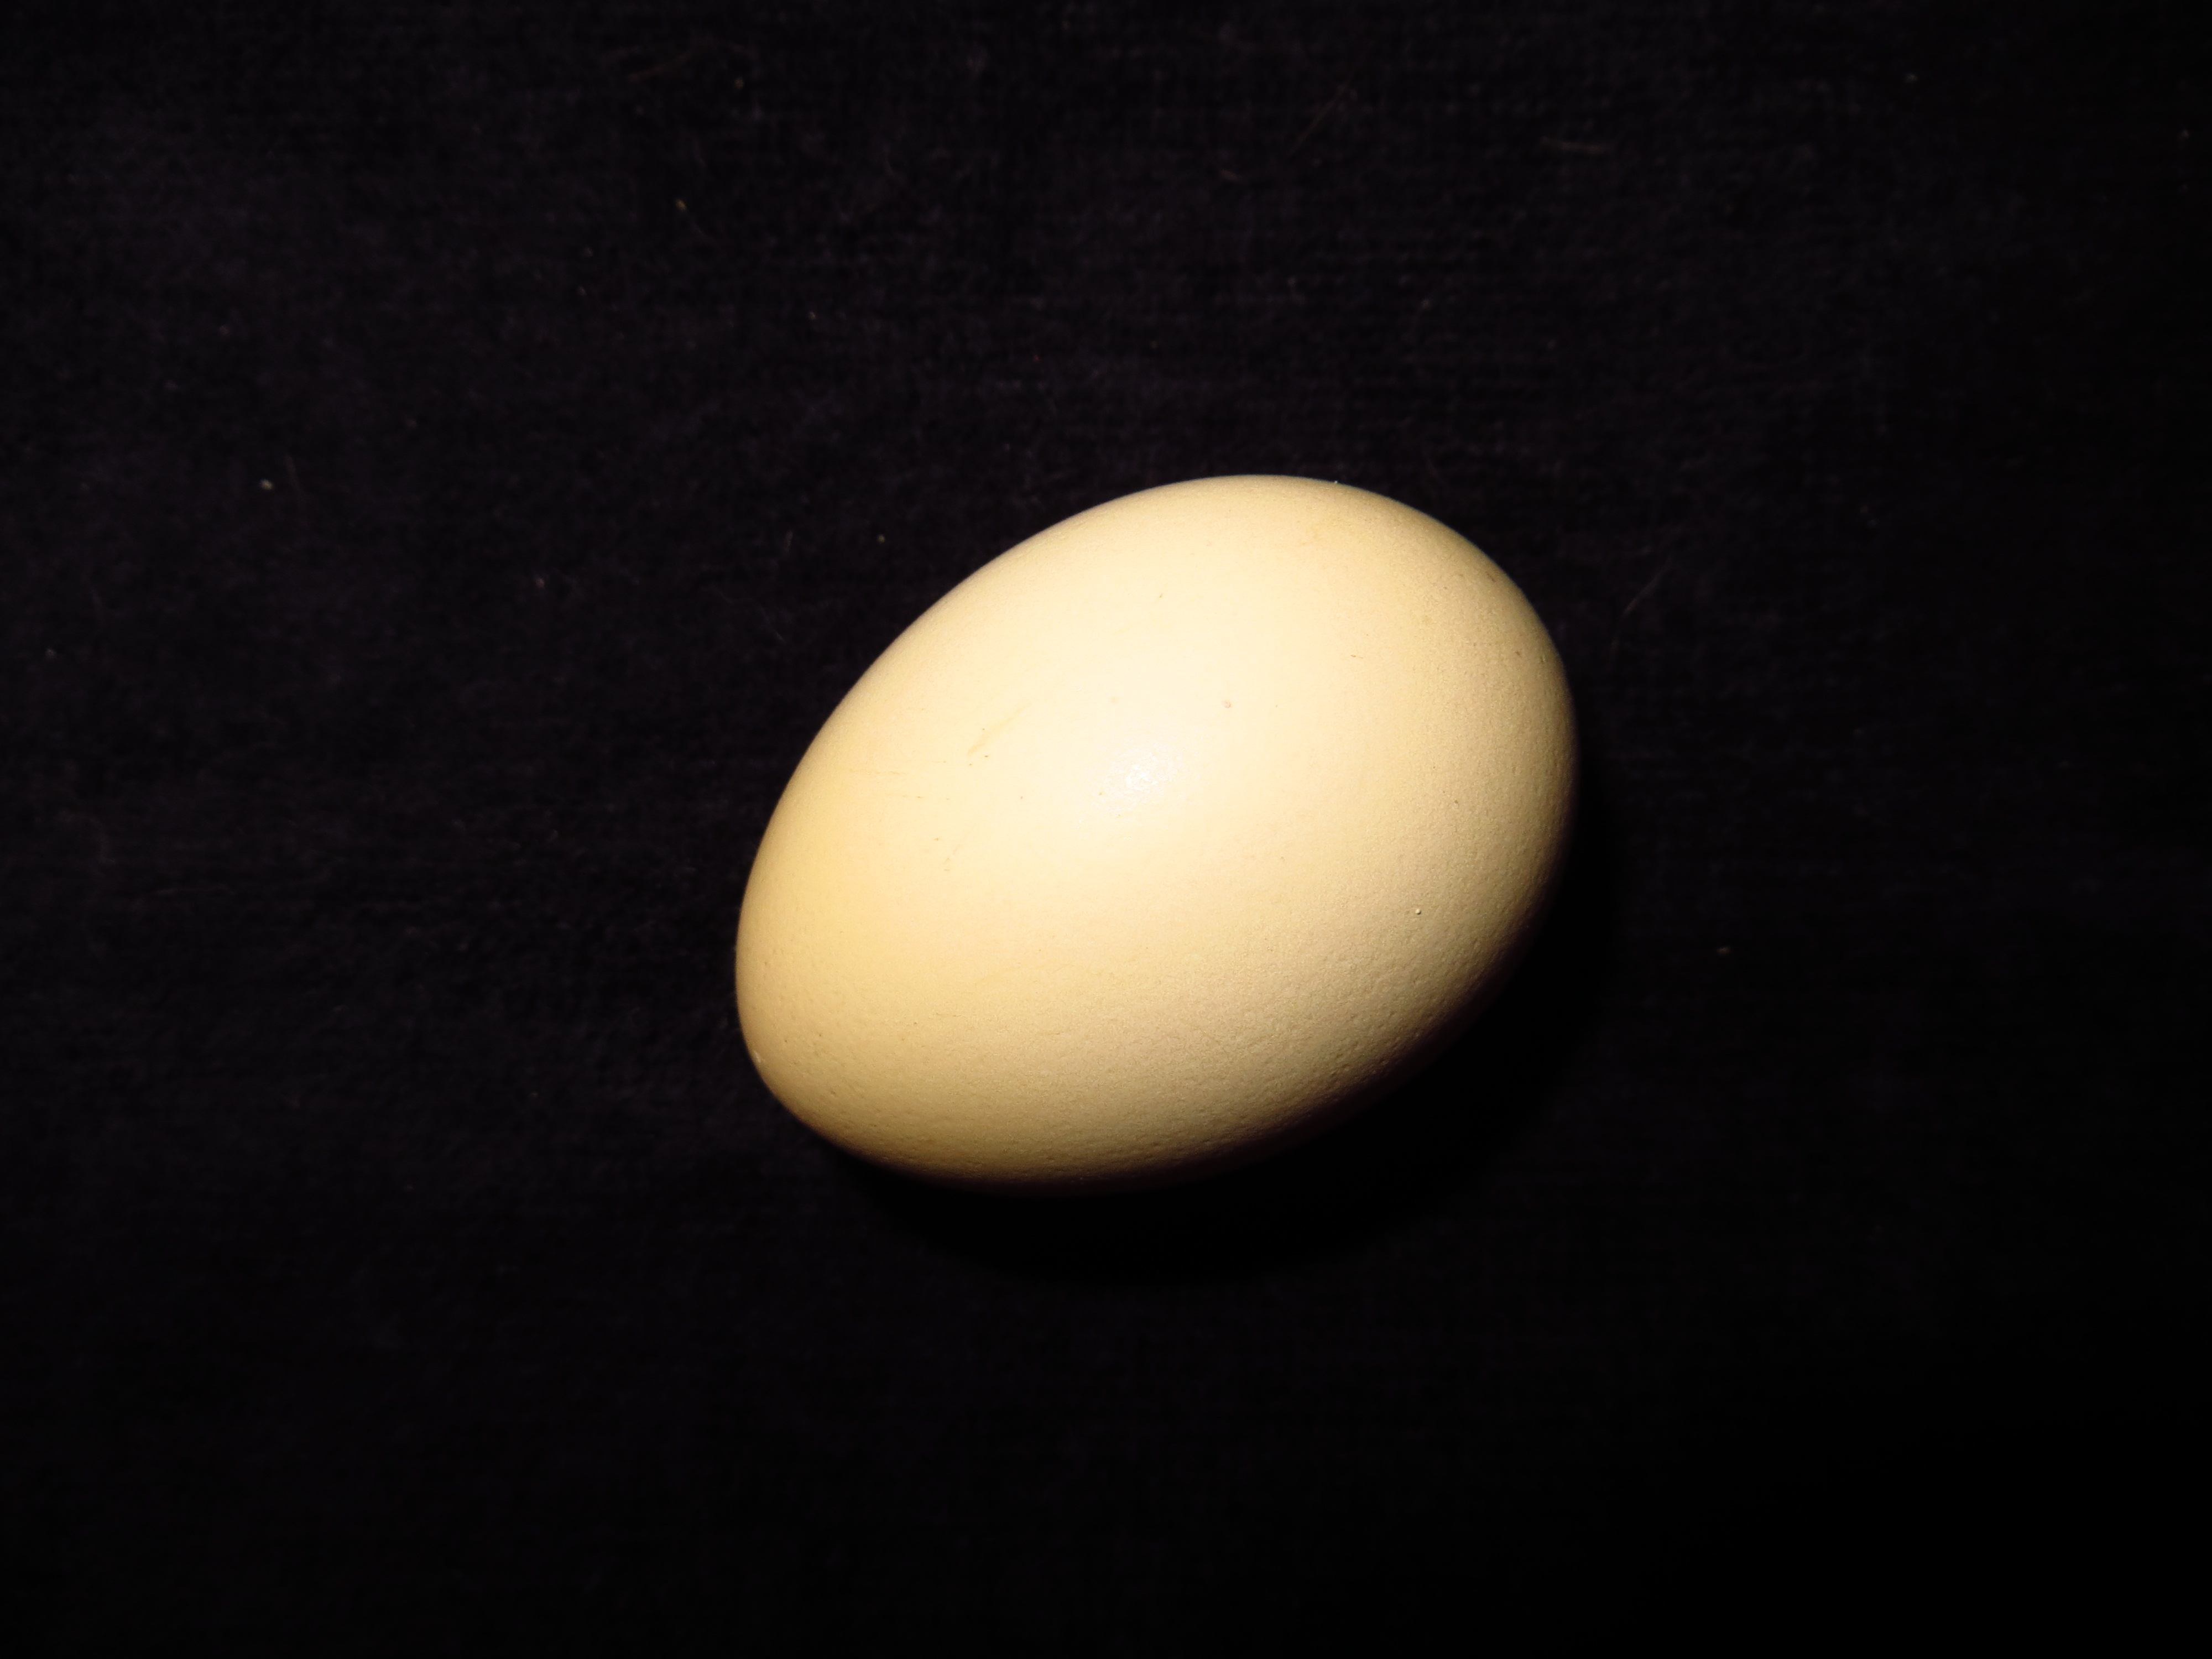 This is a photo of the first egg laid by one of our hens. It is regular size and tan in color